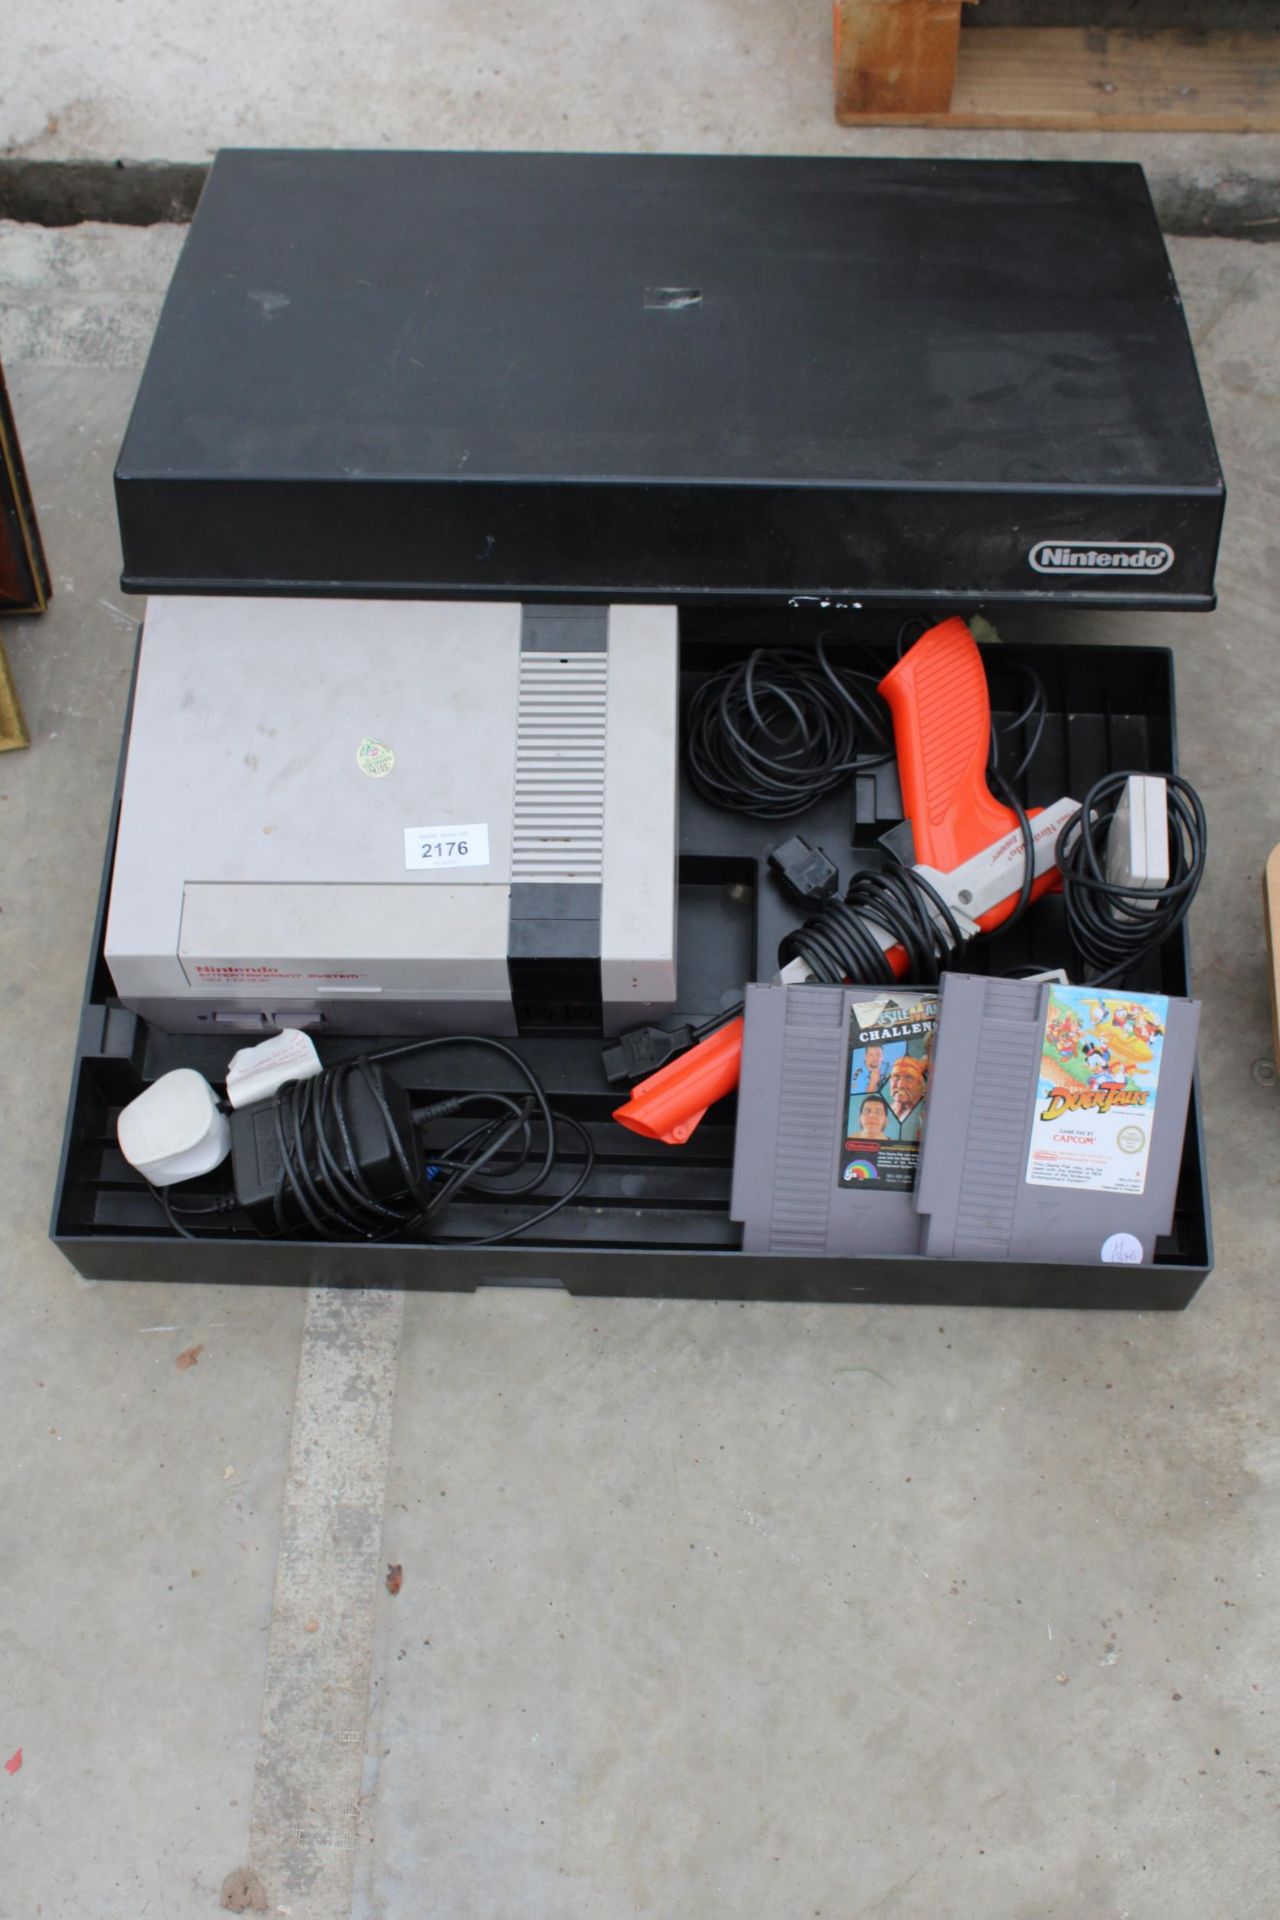 A NINTENDO ENTERTAINMENT SYSTEM GAMES CONSOLE WITH CONTROLLERS AND TWO GAMES